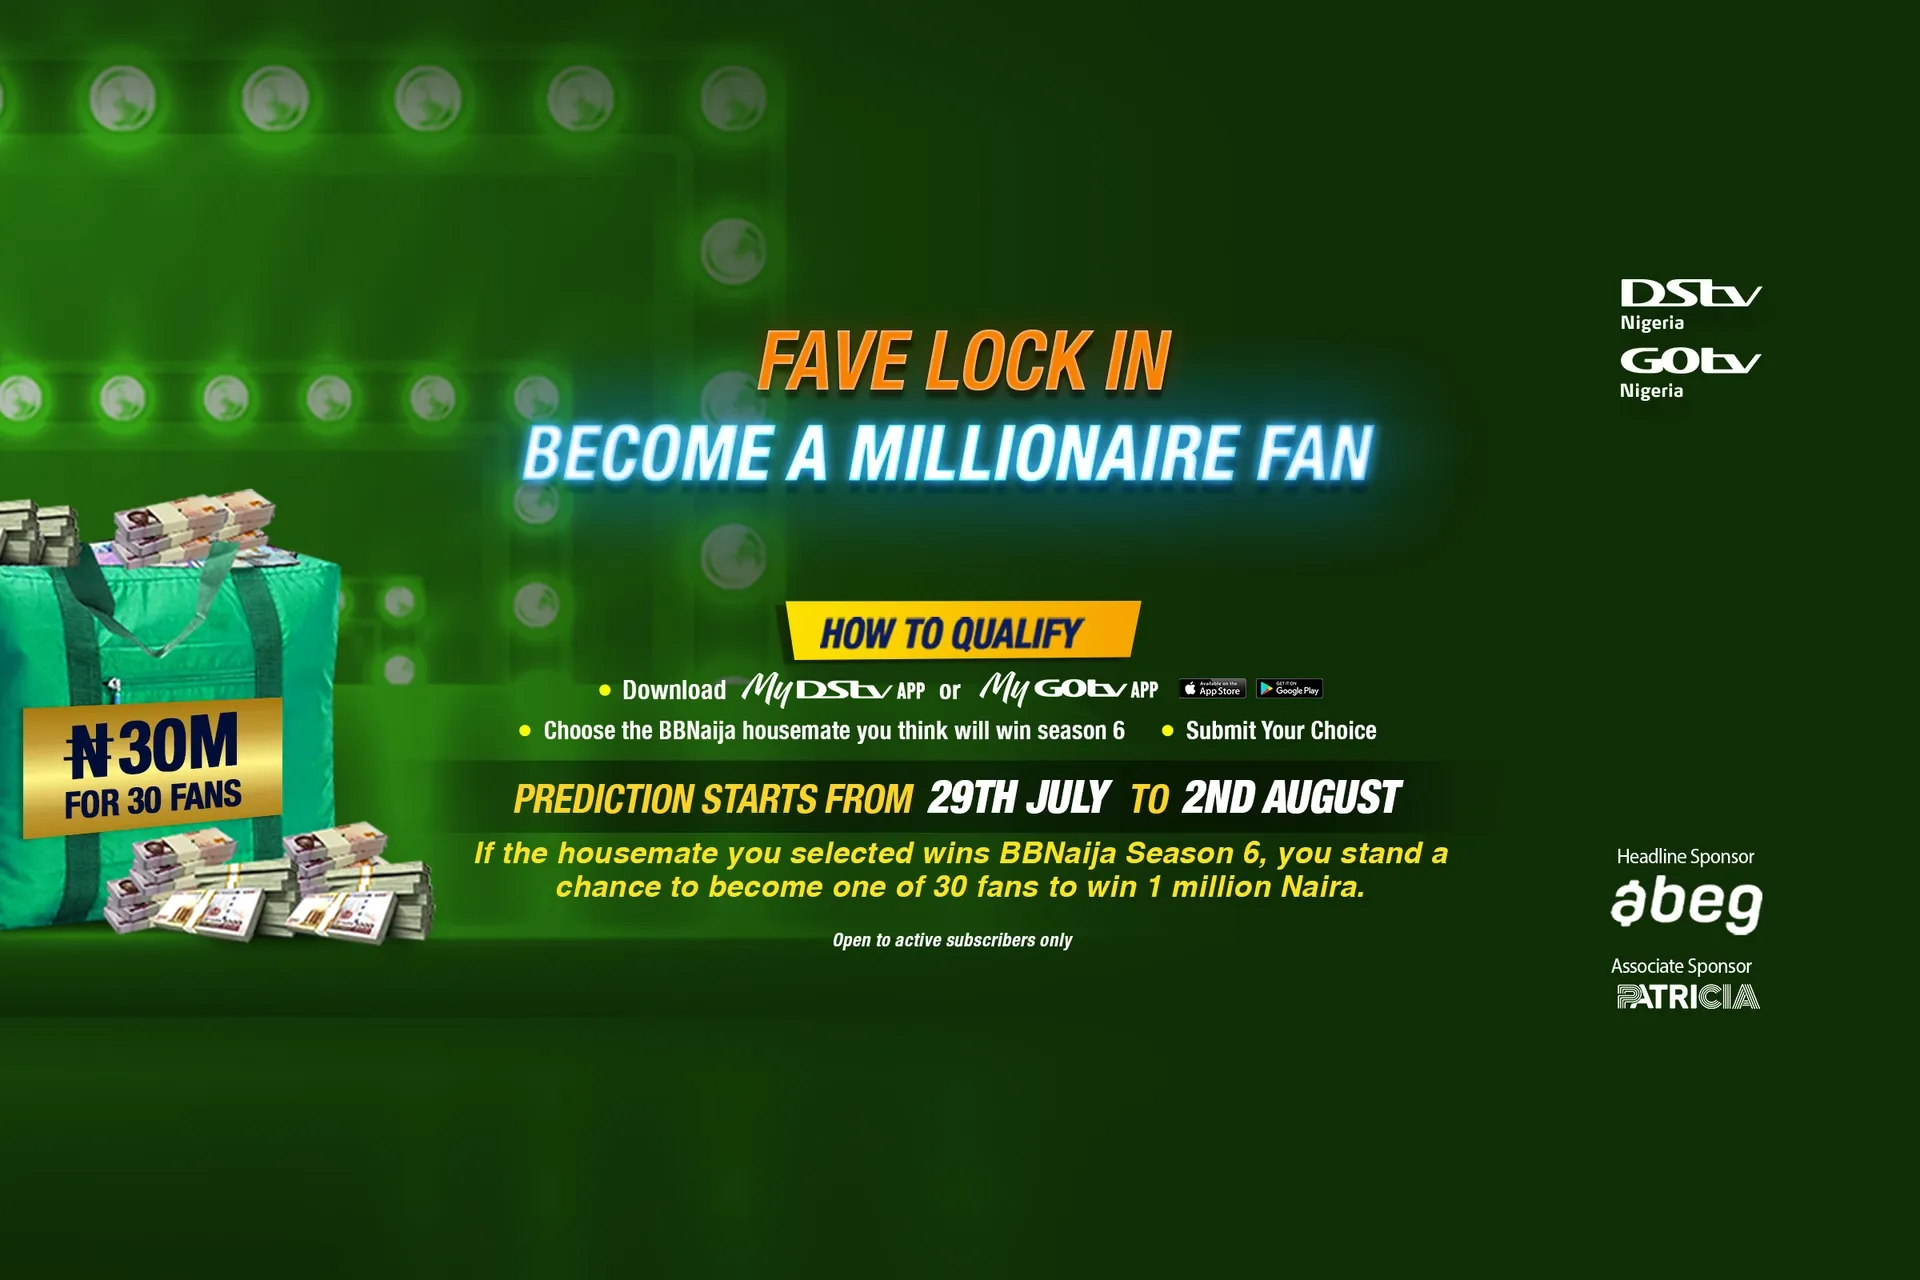 How to become a millionaire with the BBNaija Fave Lock-In competition. 